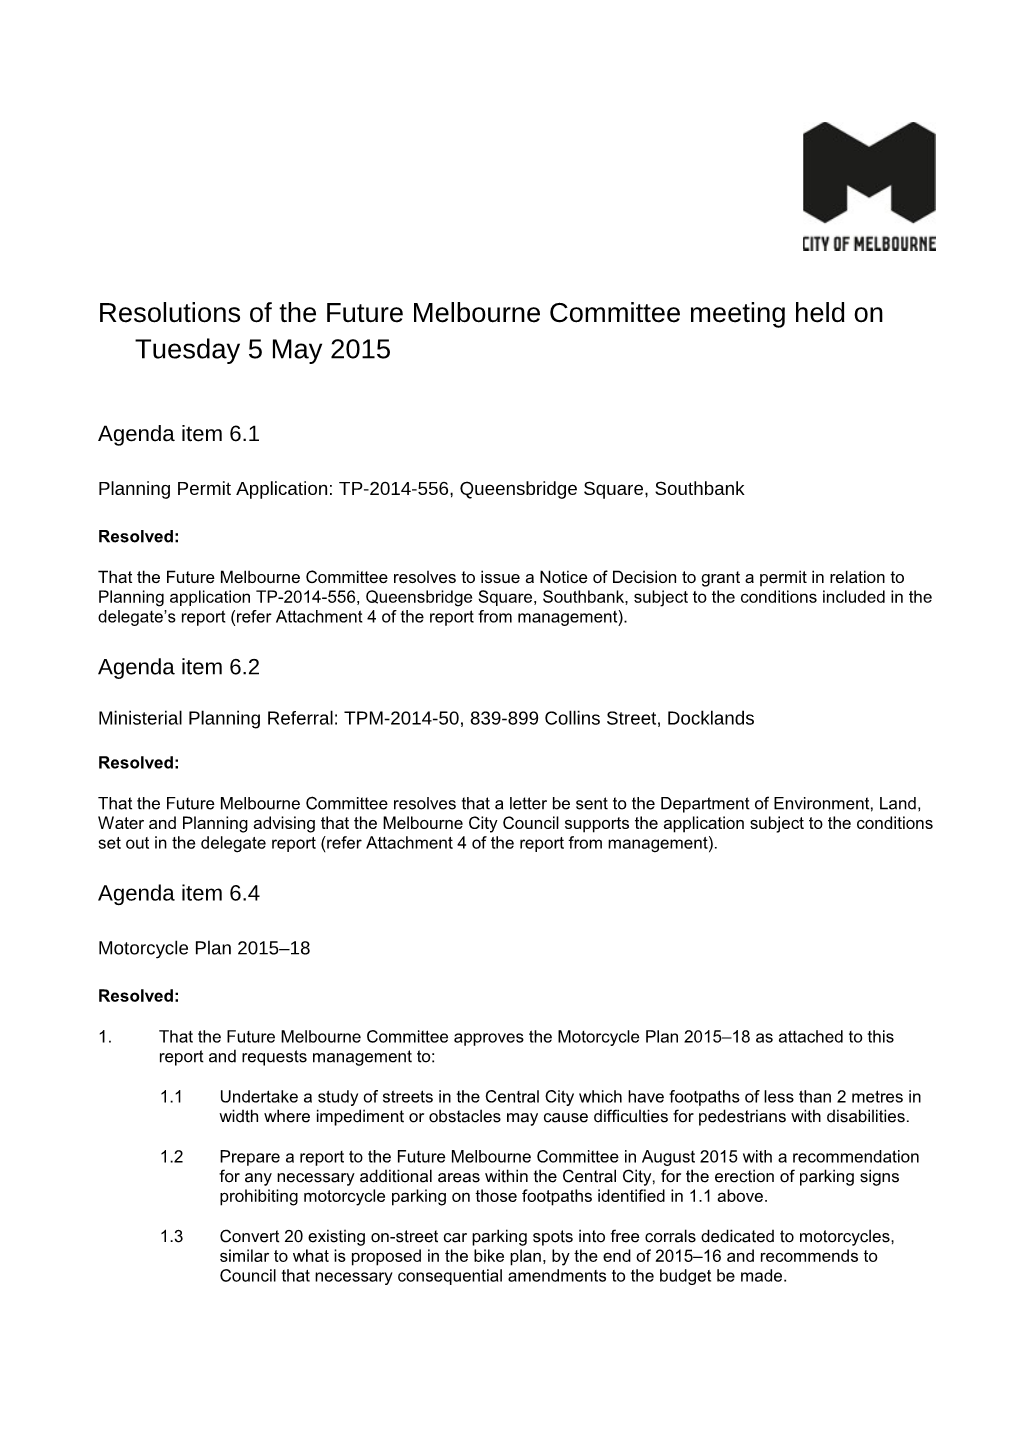 Resolutions of the Future Melbourne Committee Meeting Held on Tuesday 5 May 2015